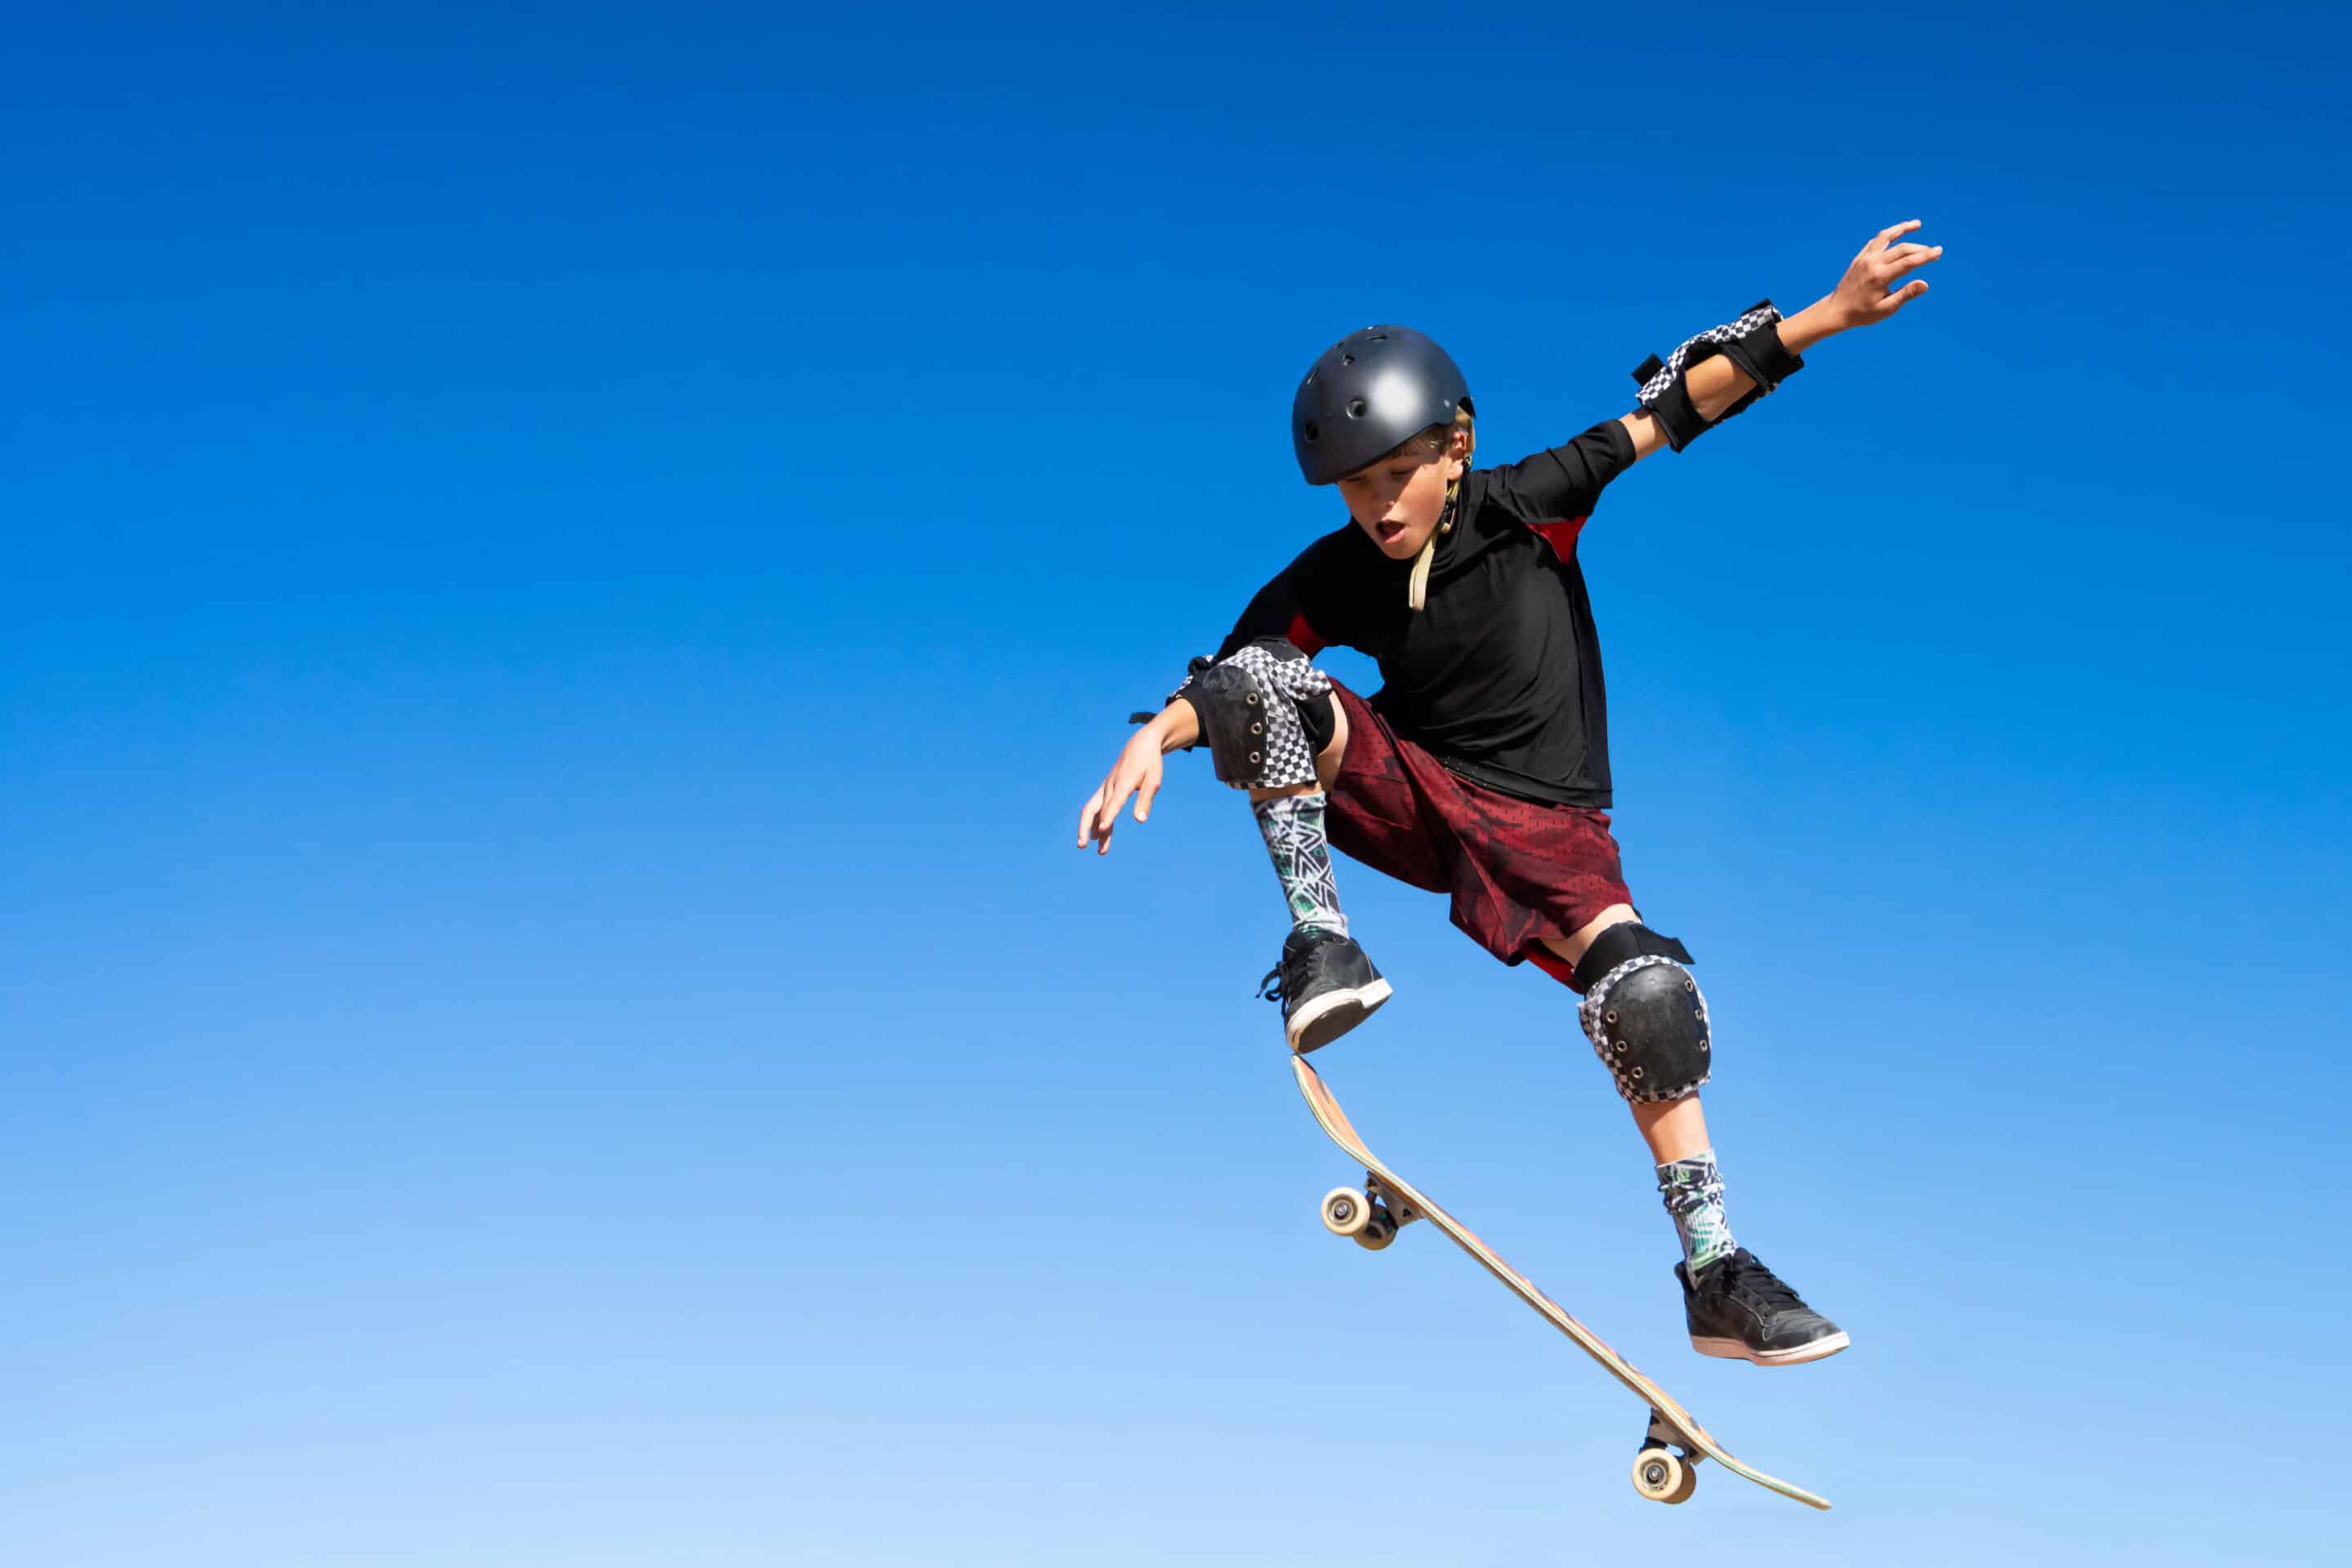 Young Boy On A Skateboard Jumping Into The Air